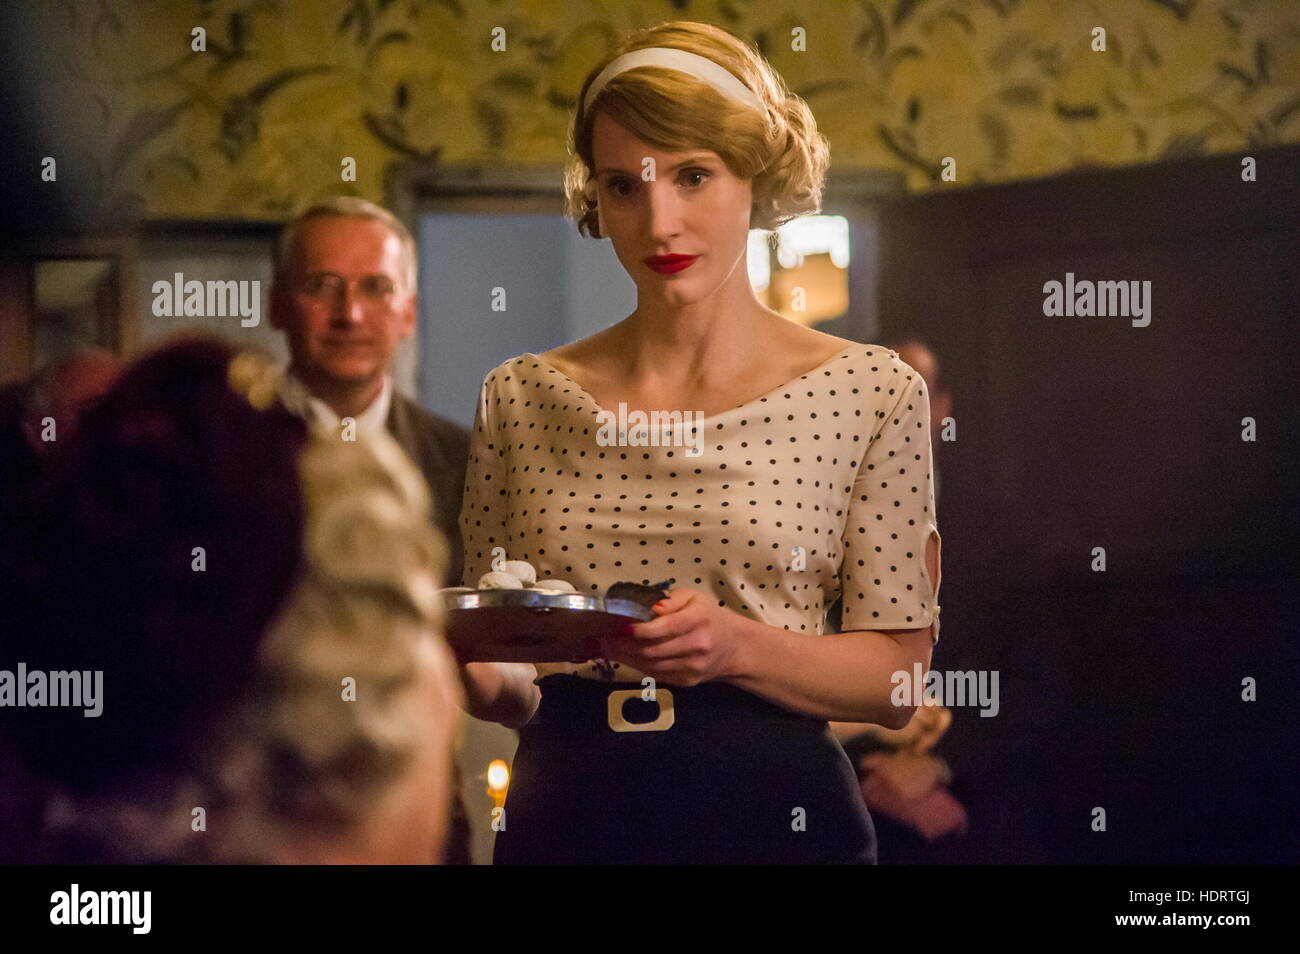 RELEASE DATE: March 3, 2017 TITLE: The Zookeeper's Wife STUDIO: Focus Features DIRECTOR: Niki Caro PLOT: The Zookeeper's Wife tells the account of keepers of the Warsaw Zoo, Antonina and Jan Zabinski, who helped save hundreds of people and animals during the Nazi invasion STARRING: Jessica Chastain as Antonina Zabinski (Credit: c Focus Features/Entertainment Pictures/) Stock Photo